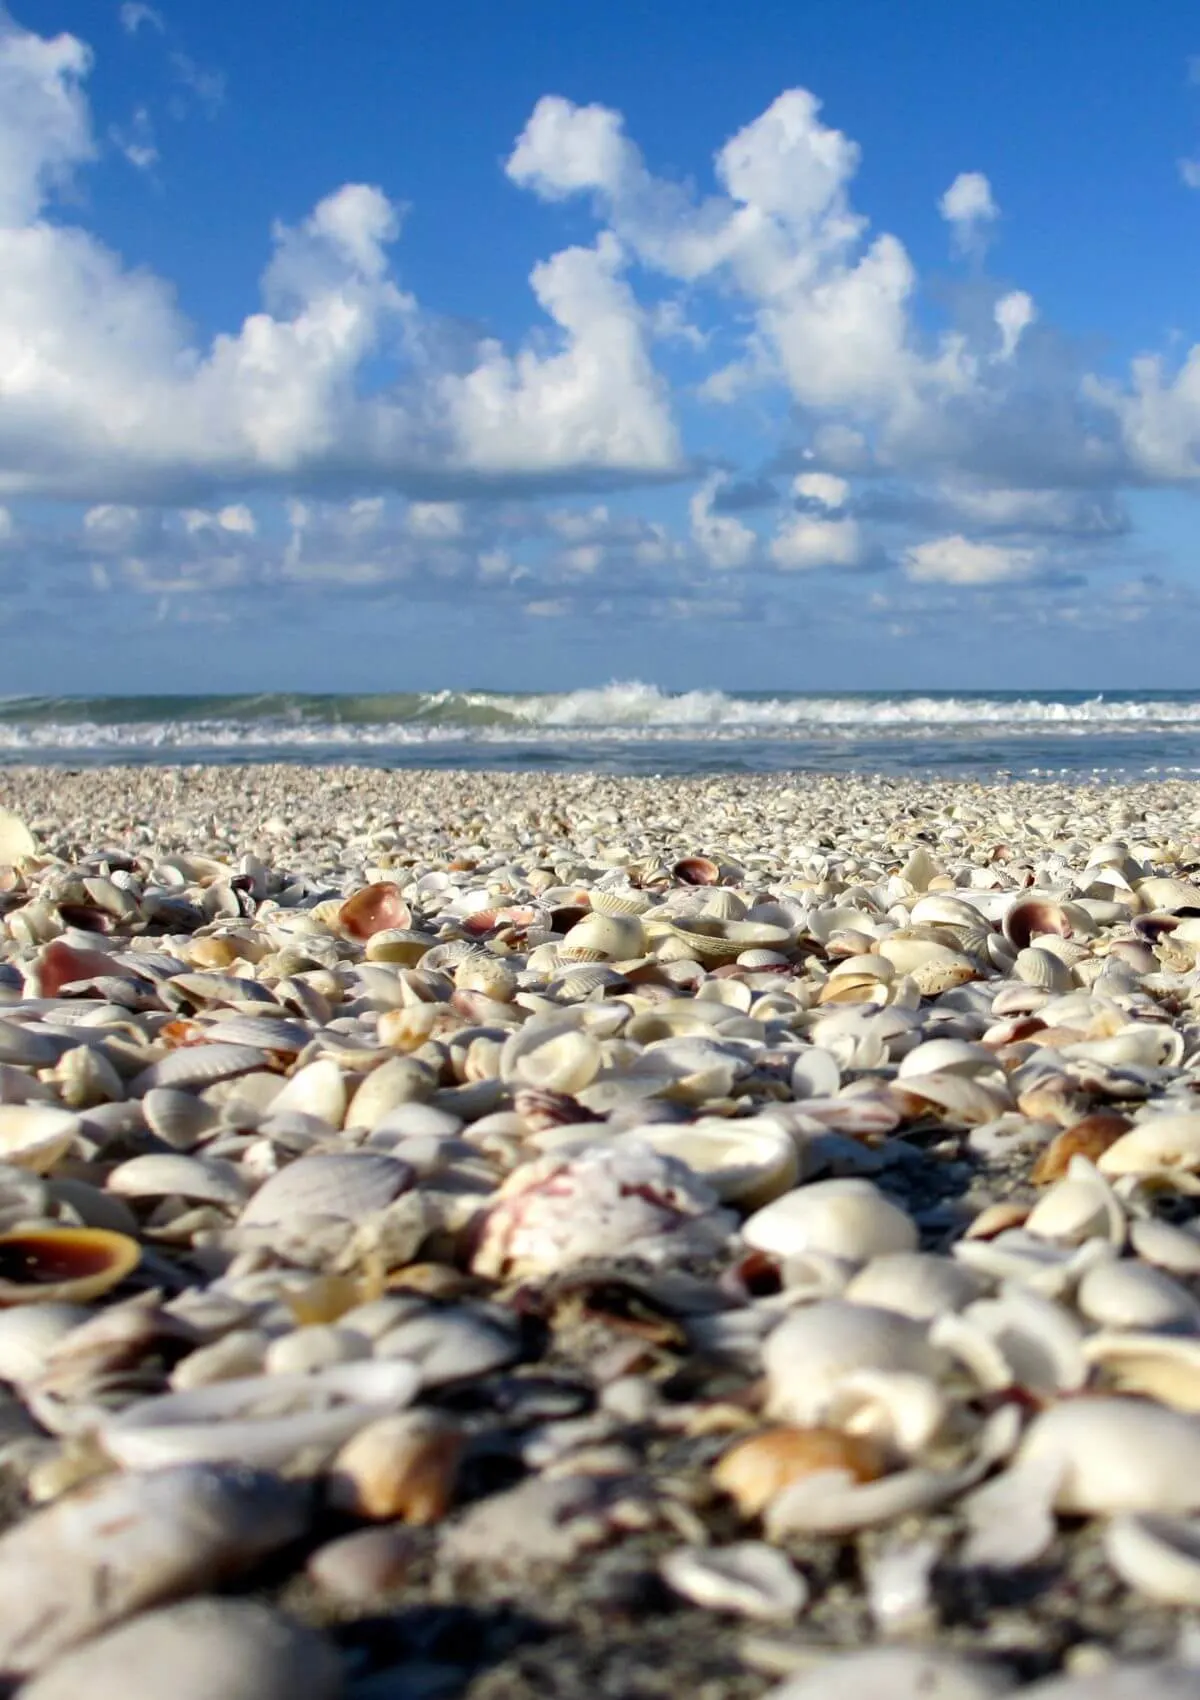 Visit Sanibel Island to buy amazing sea glass souvenirs from Florida